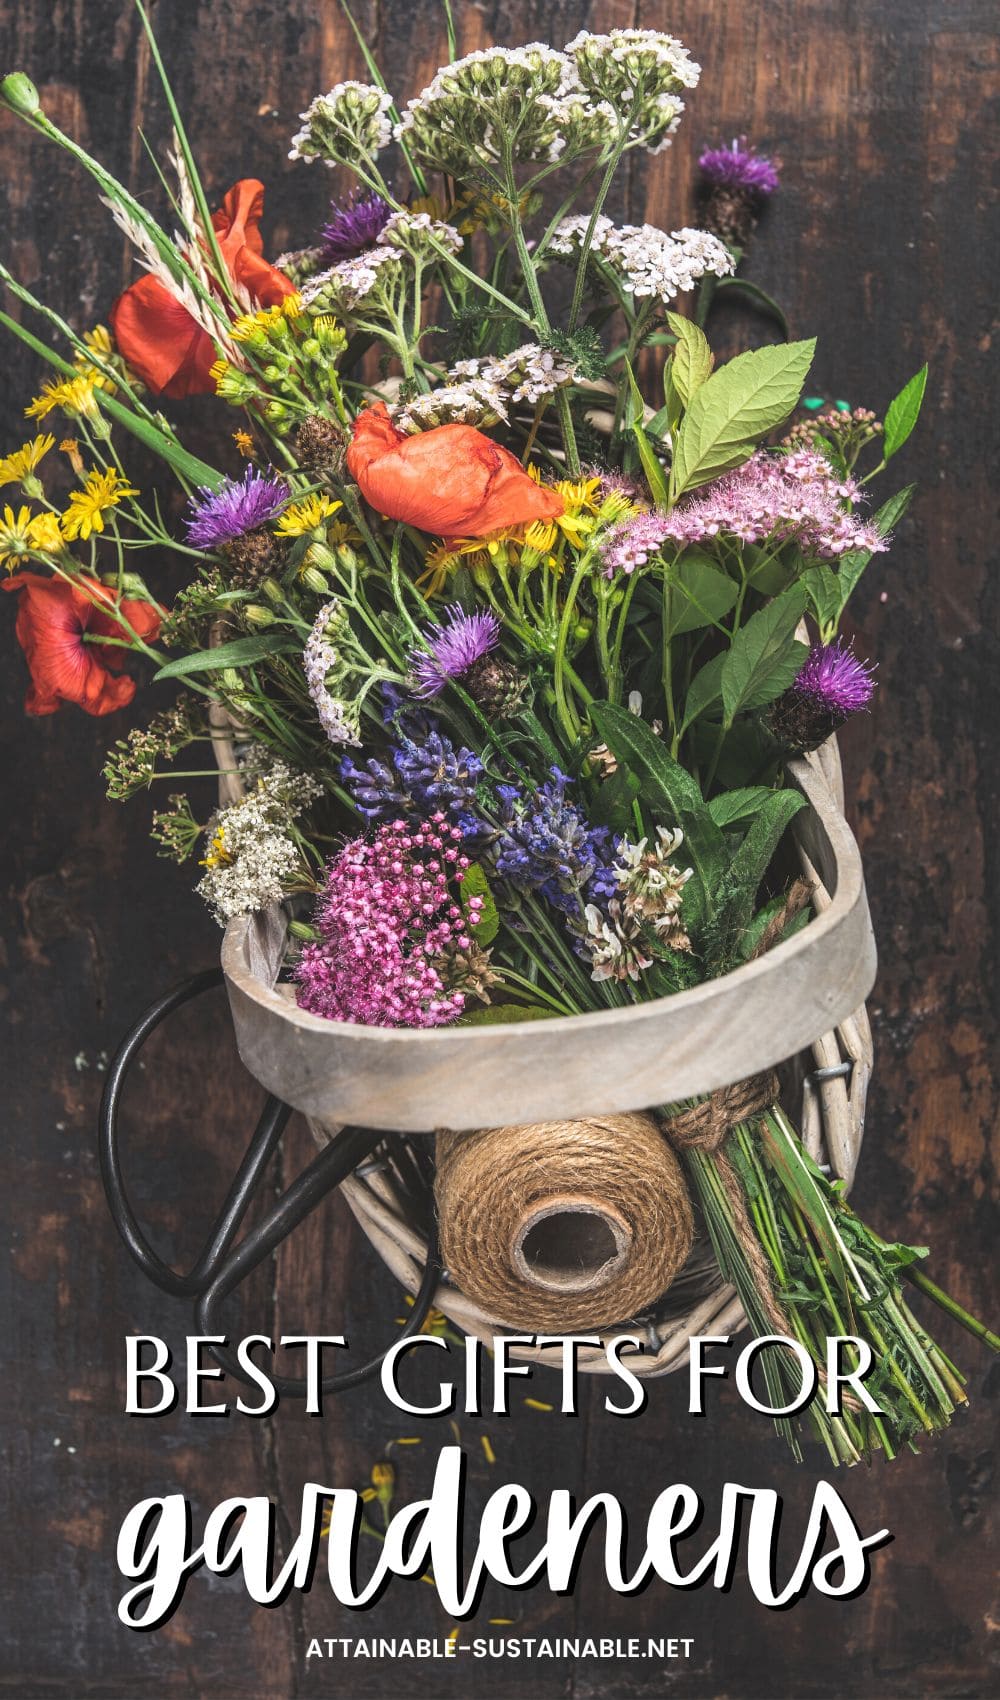 bright bouquet of flowers in a wooden basket on a dark background.